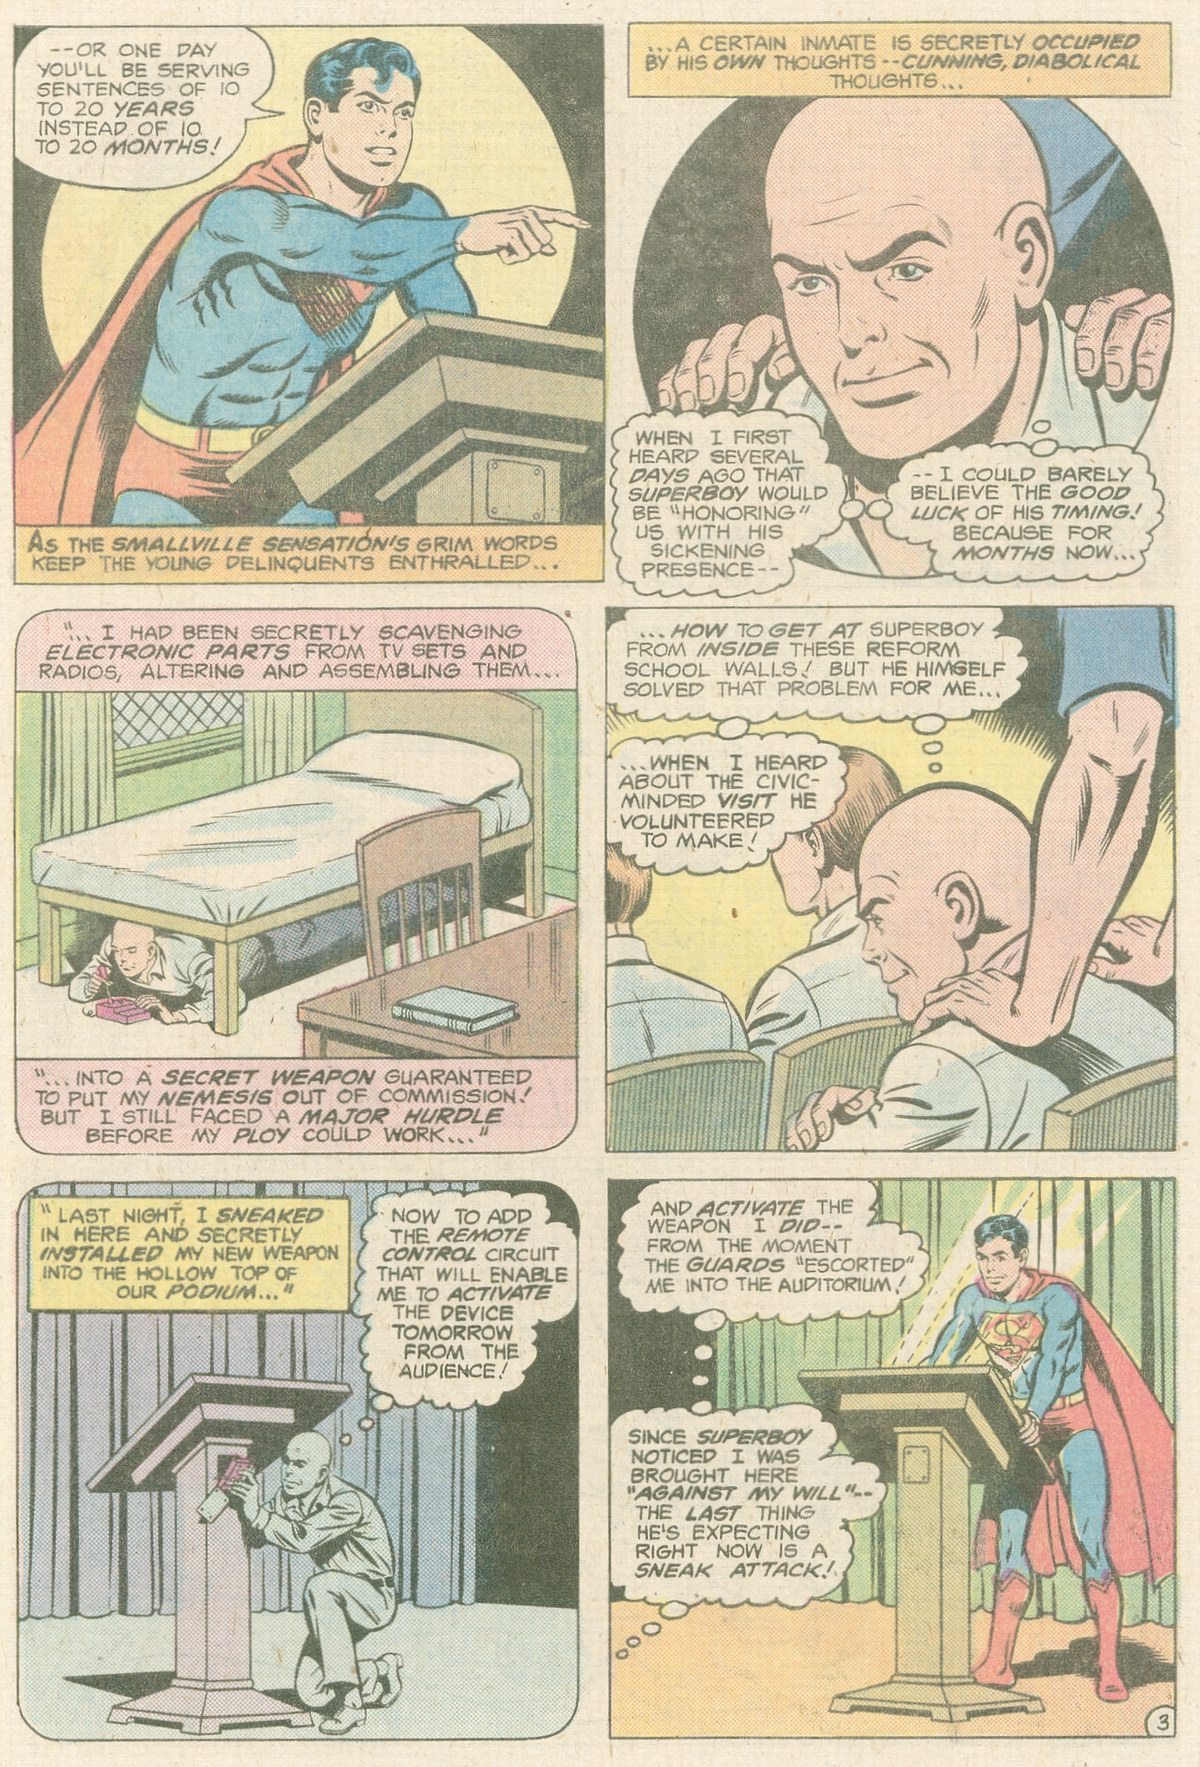 The New Adventures of Superboy 14 Page 3